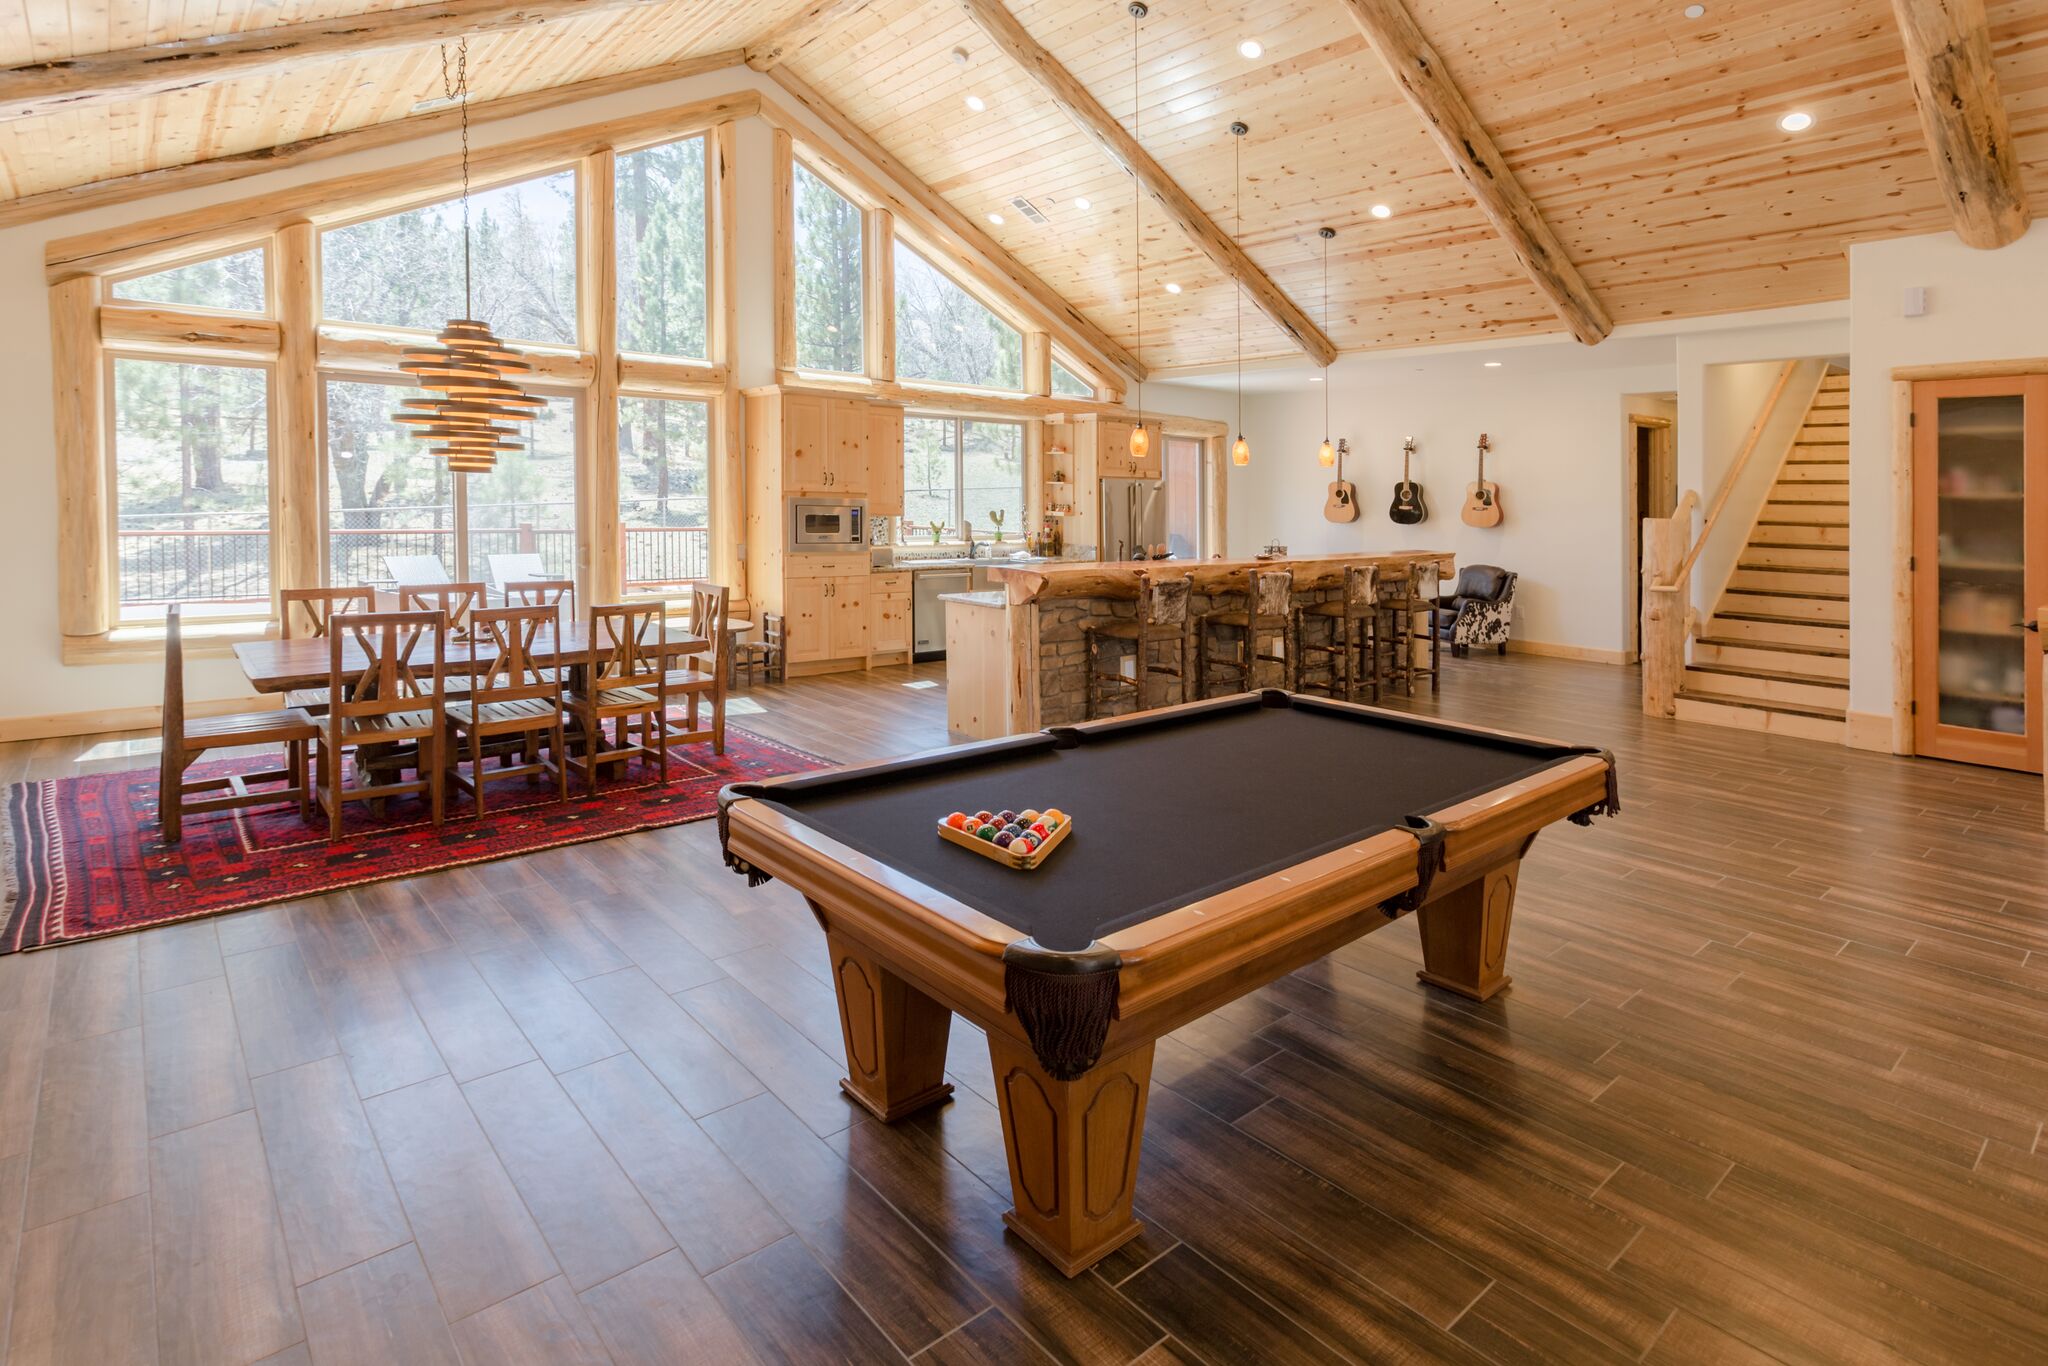 Our Big Bear Luxury Vacation Rentals